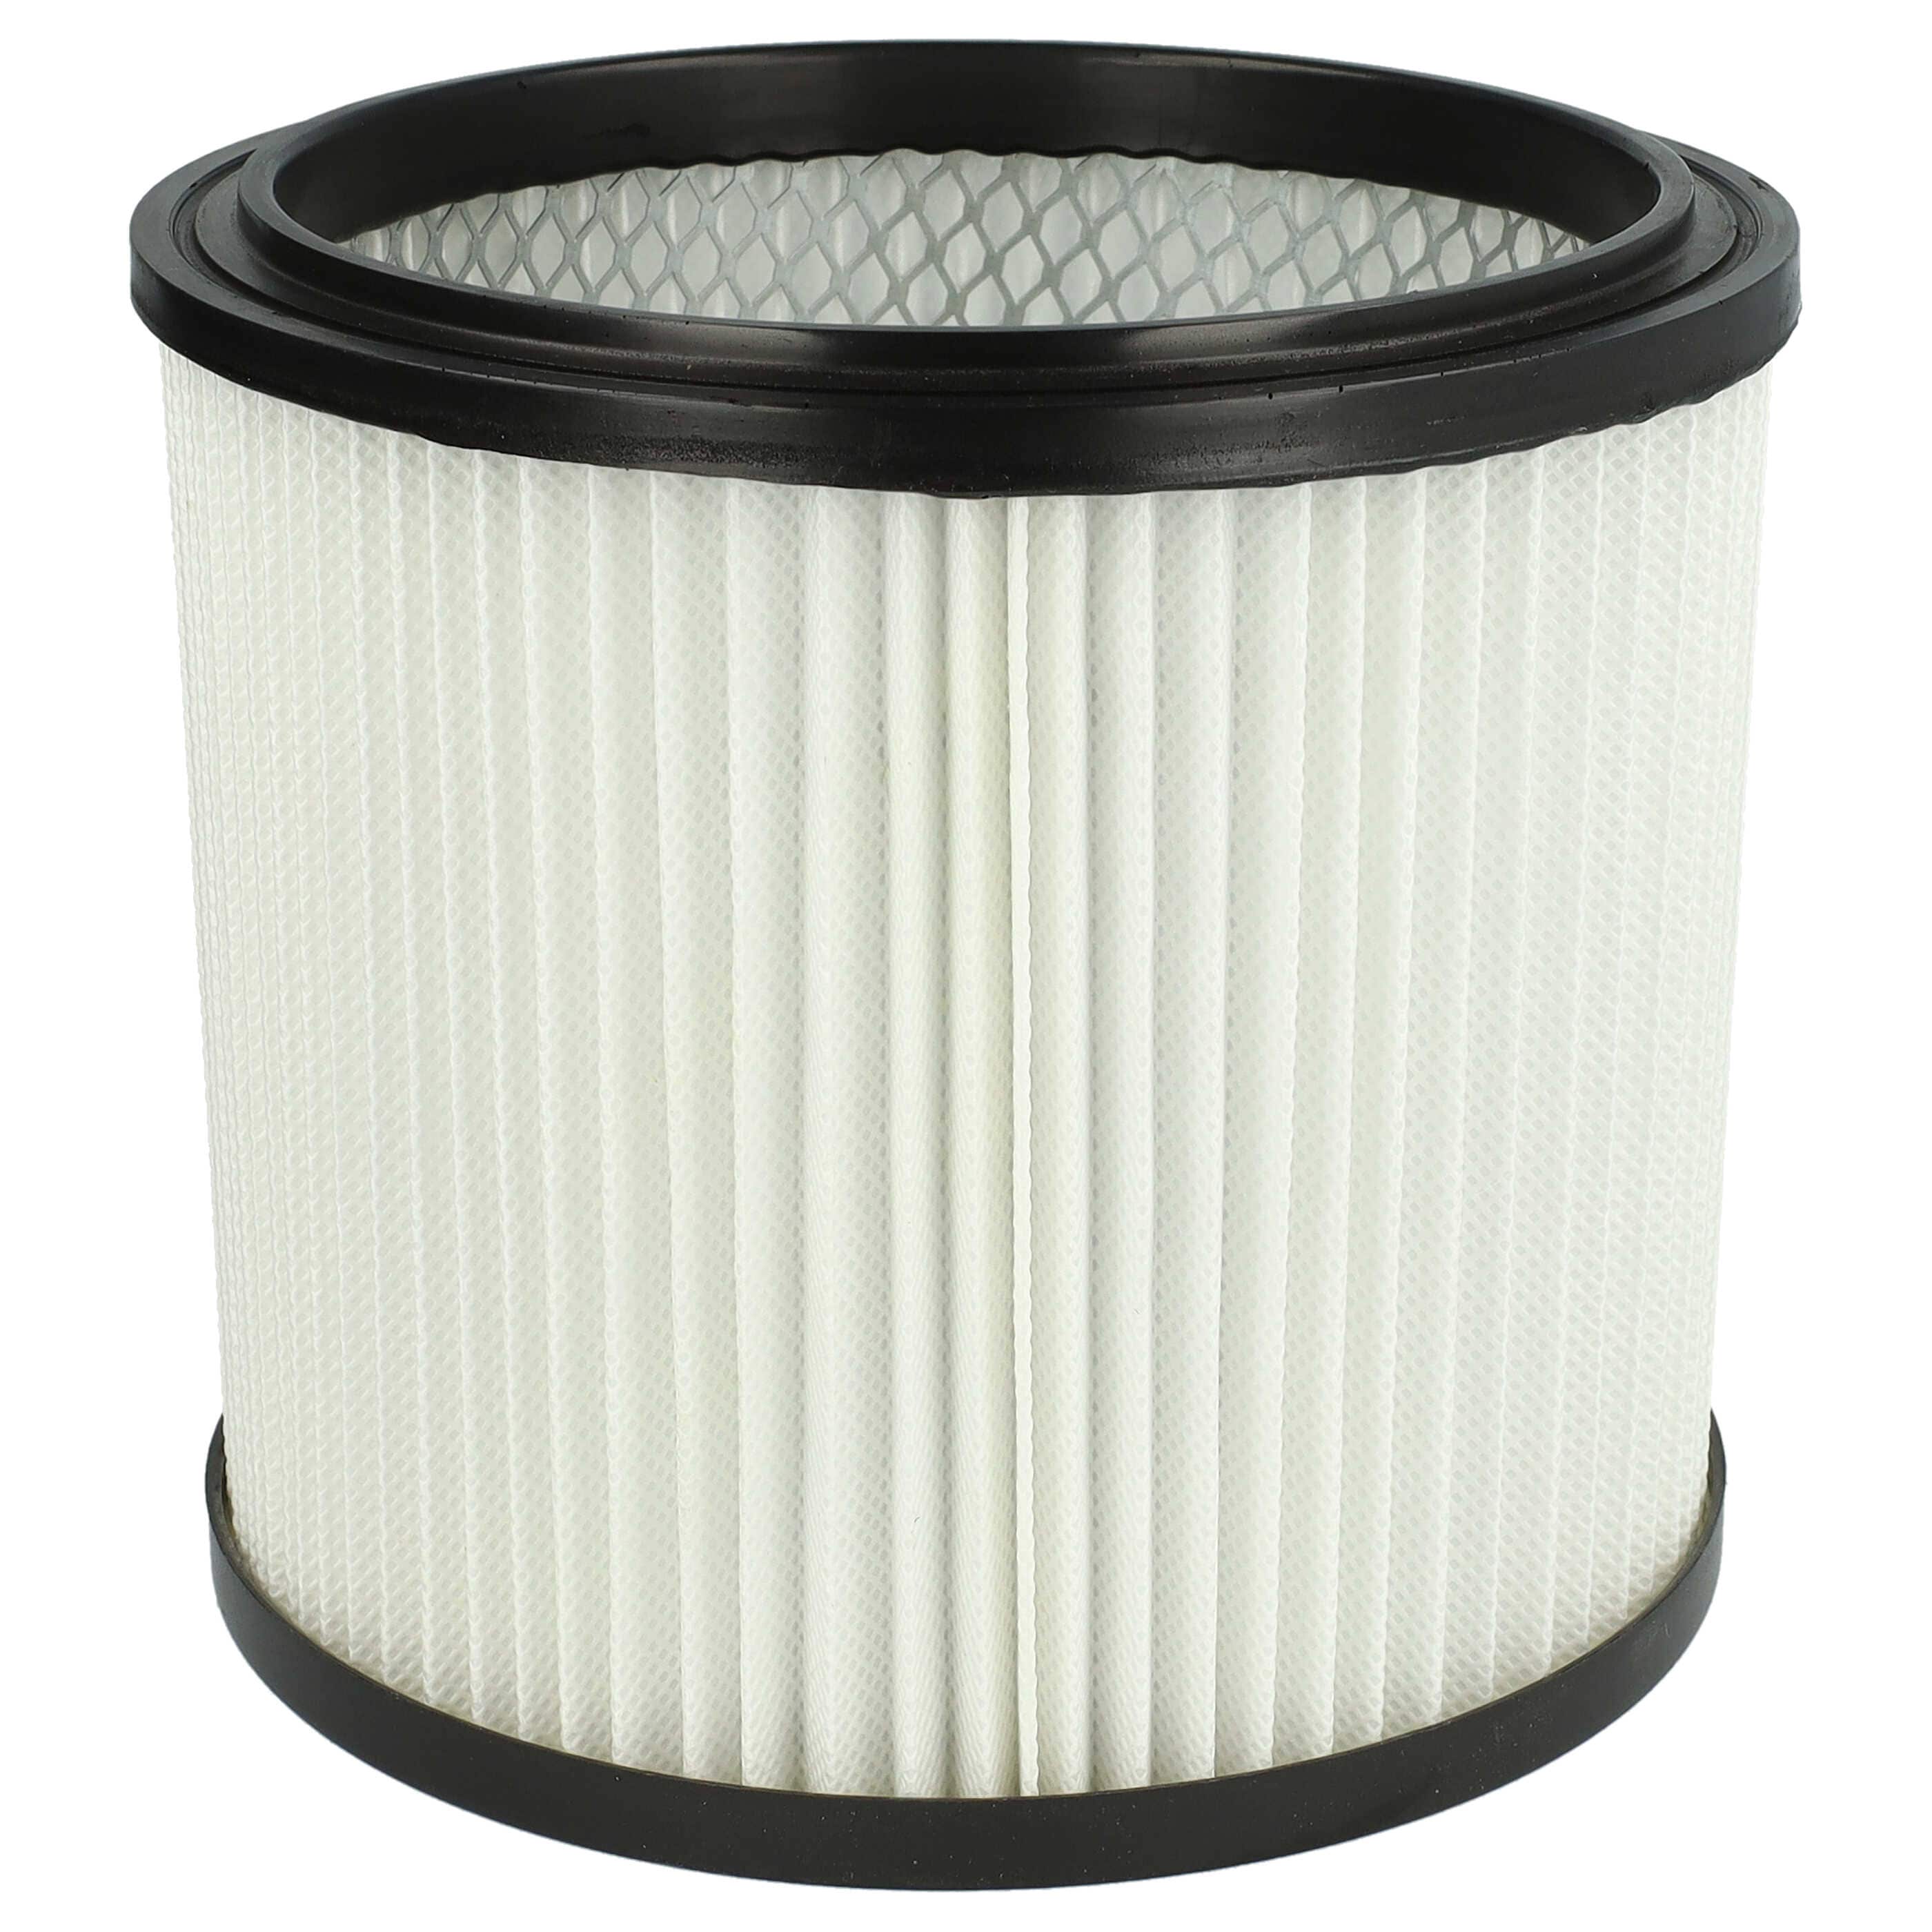 1x cartridge filter replaces Einhell 2351110 for ThomasVacuum Cleaner, black / white